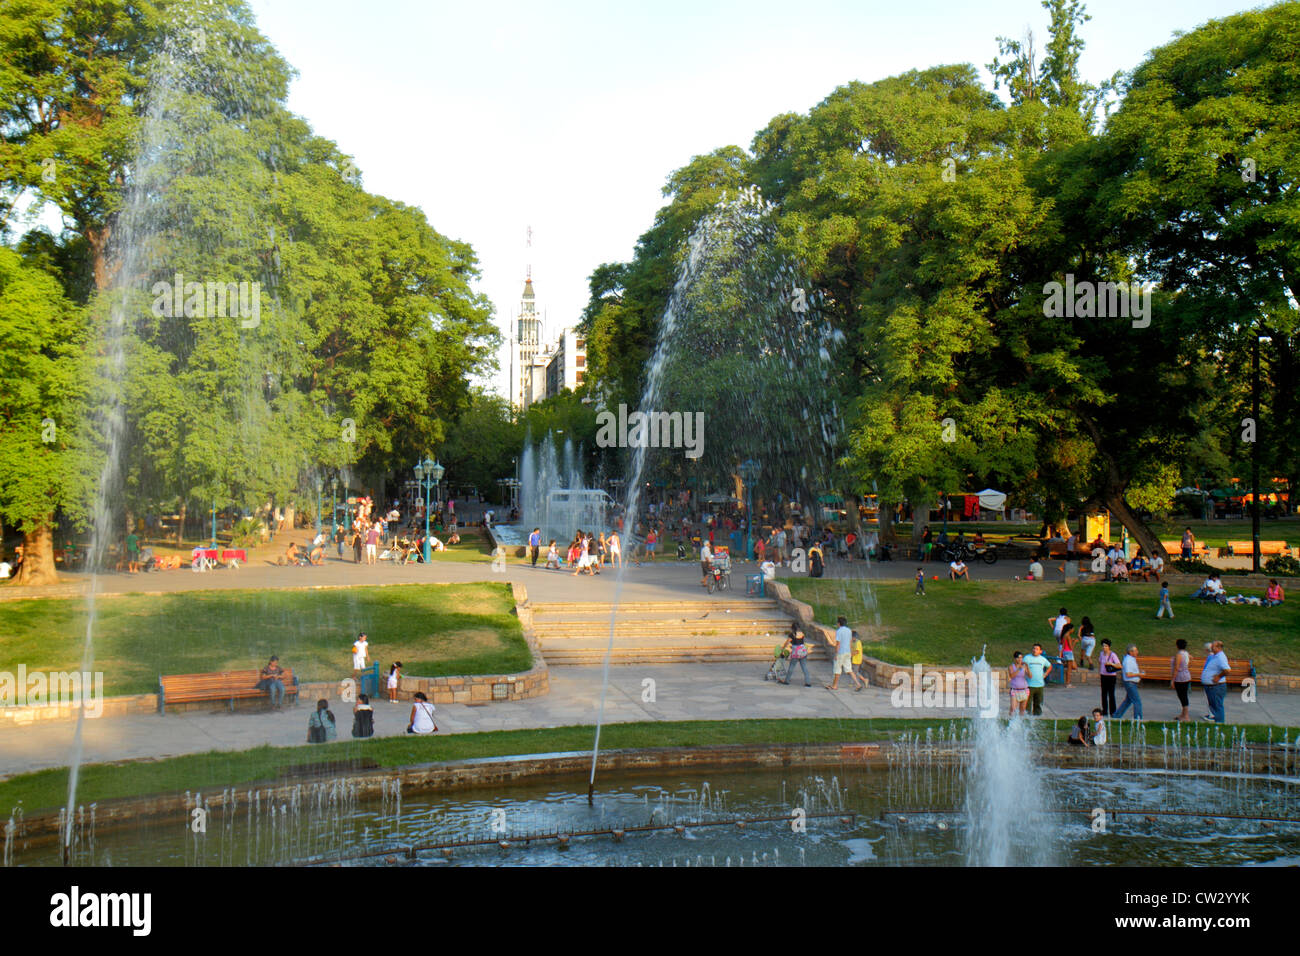 Mendoza Argentina,Plaza Independencia,public park,fountain,green space,crowd,crowded,water jet,public fountain,circular,circle,trees,vegetation,leisur Stock Photo